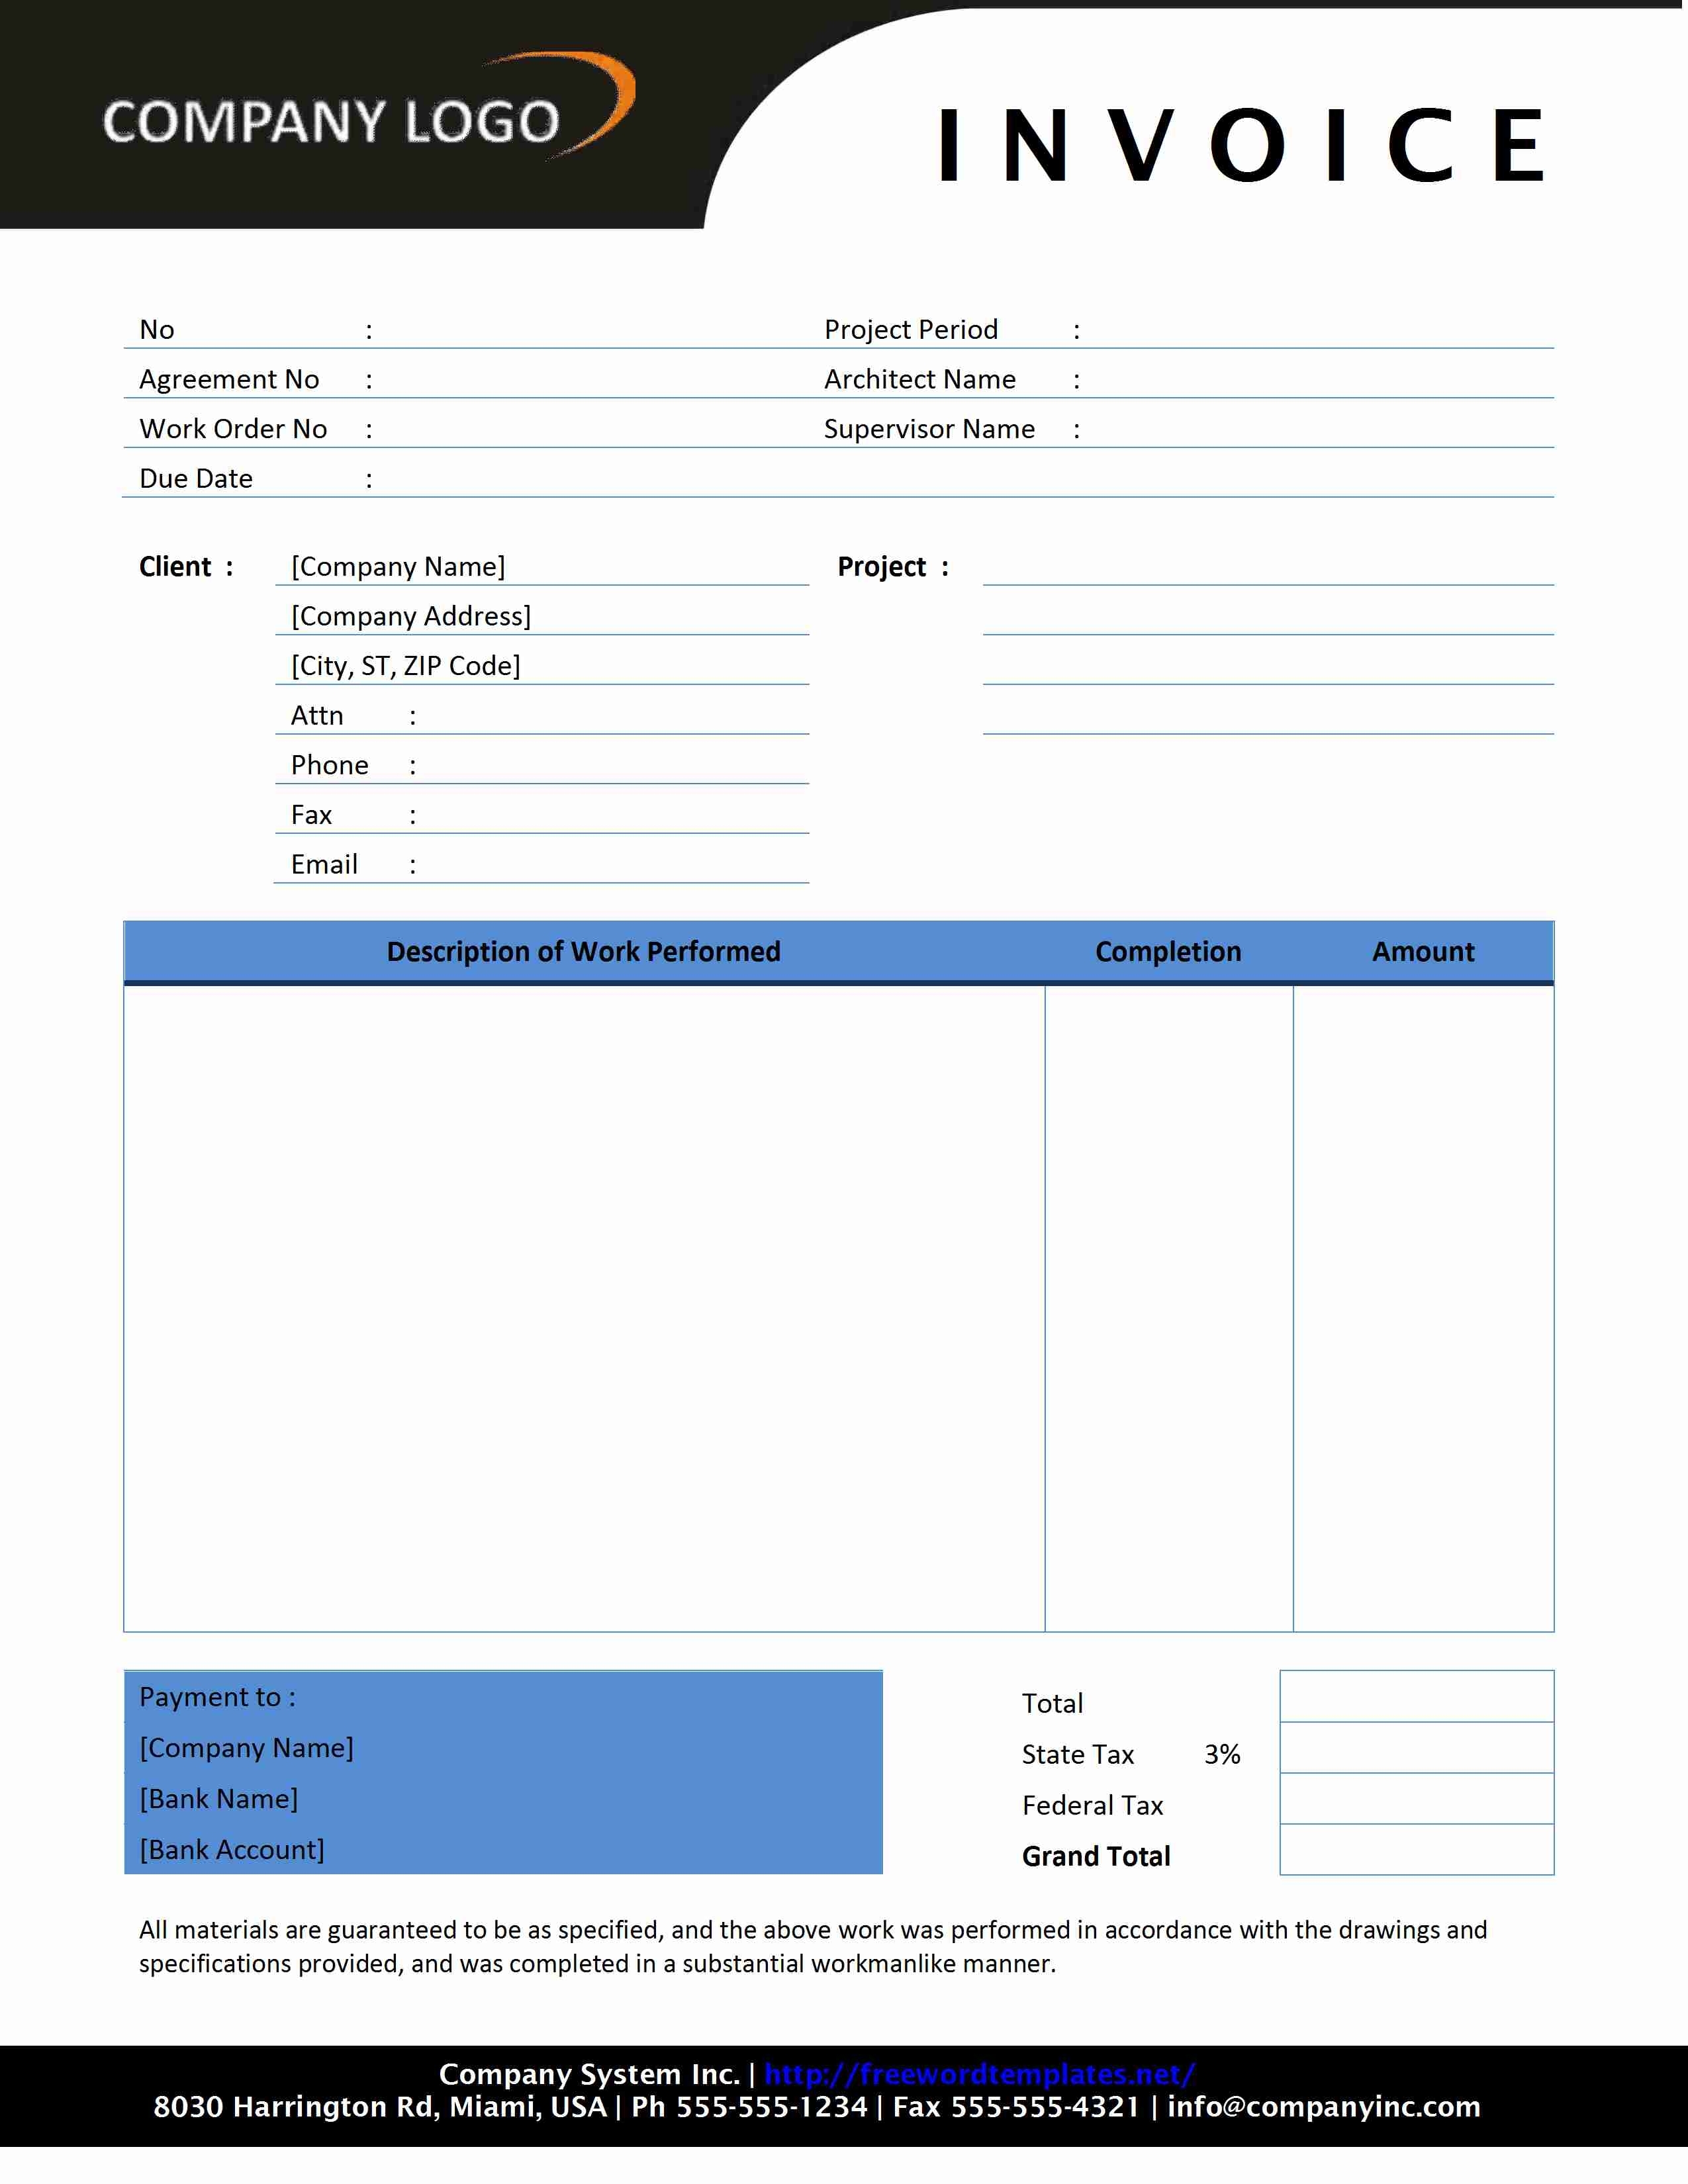 define invoice and requisition